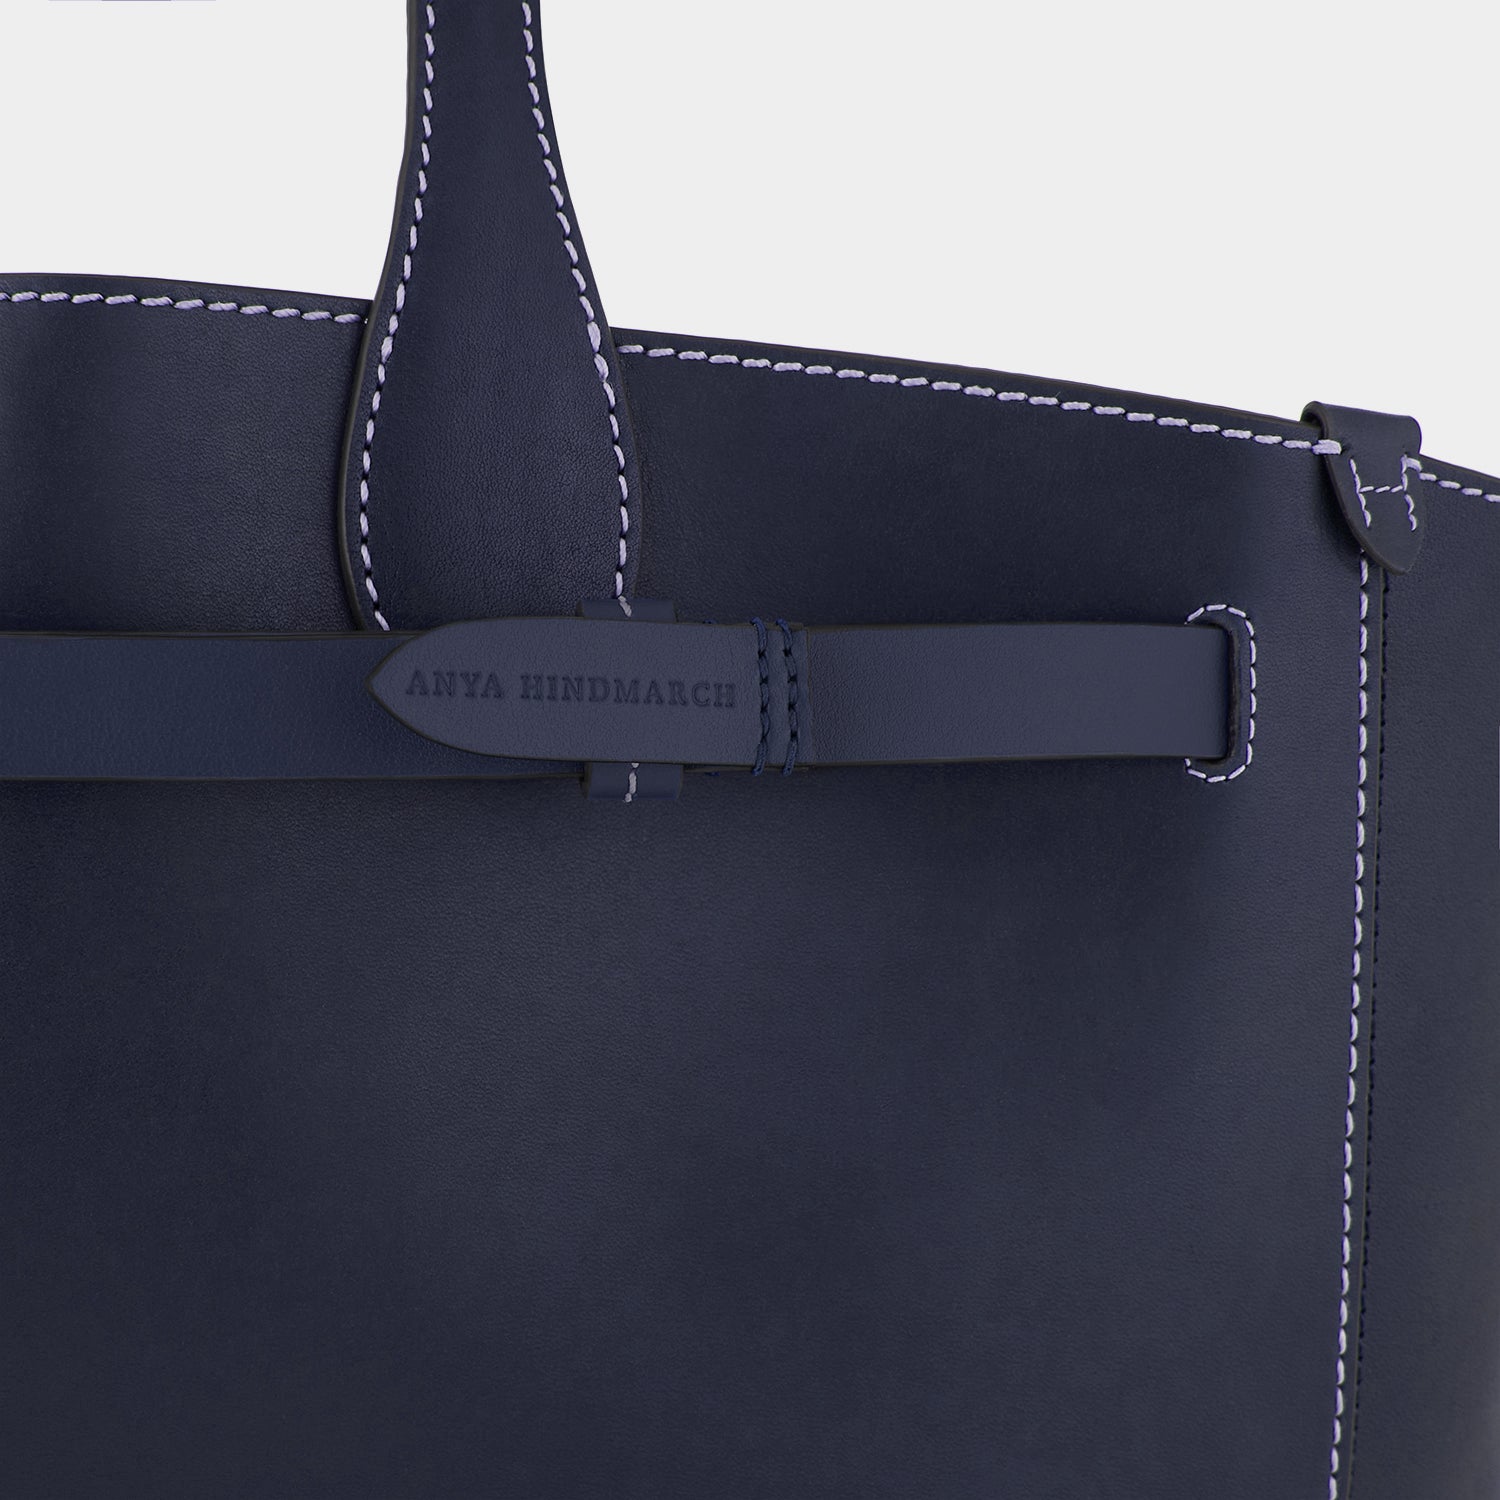 Return to Nature Tote -

                  
                    Compostable Leather in Marine -
                  

                  Anya Hindmarch UK
